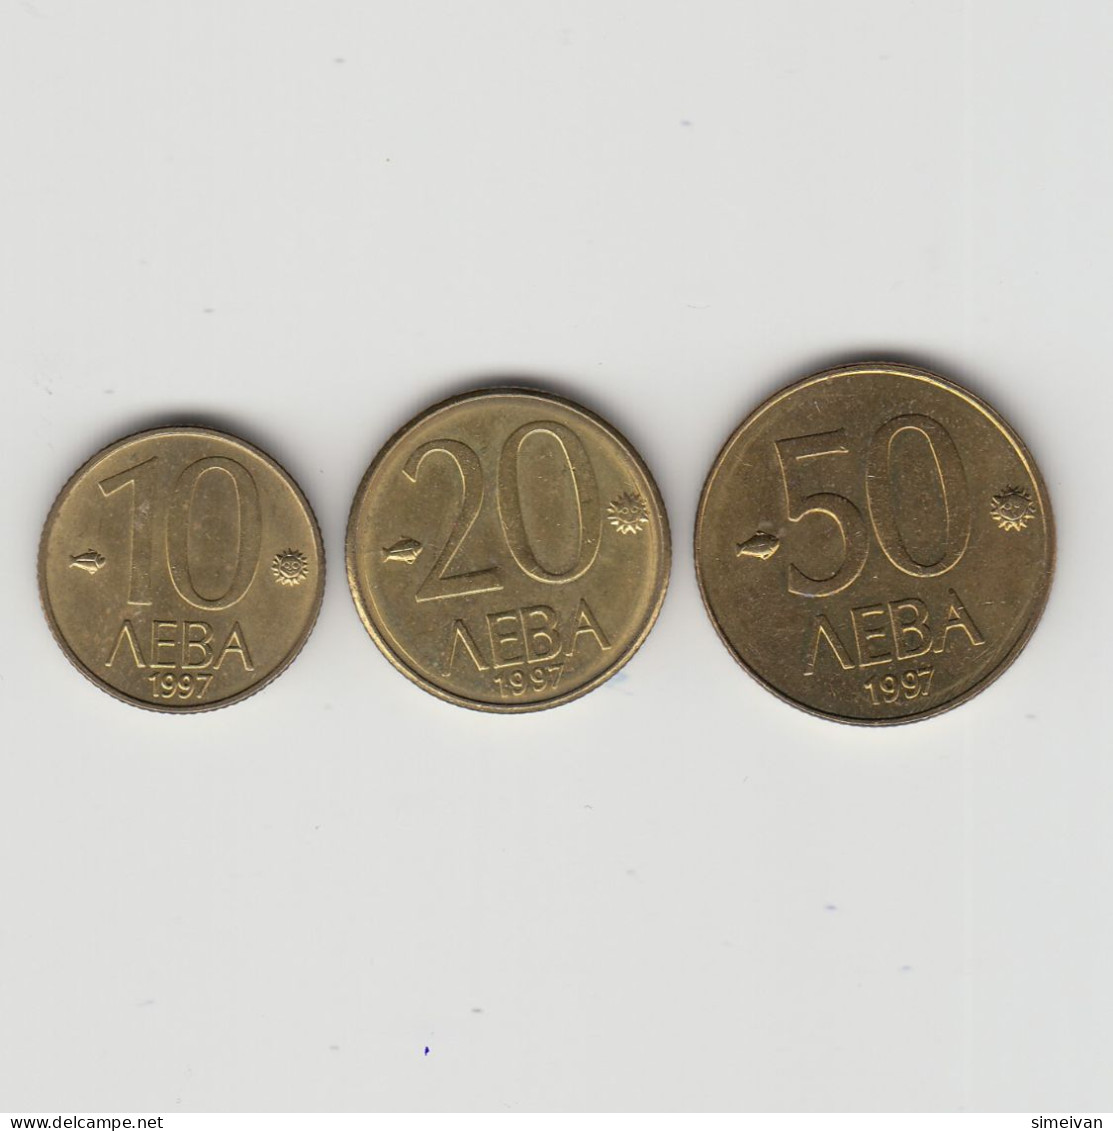 Bulgaria 10, 20, 50 Levа 1997 Coins Europe Currency Set Lot Bulgarie Bulgarien #5411 - Bulgarien